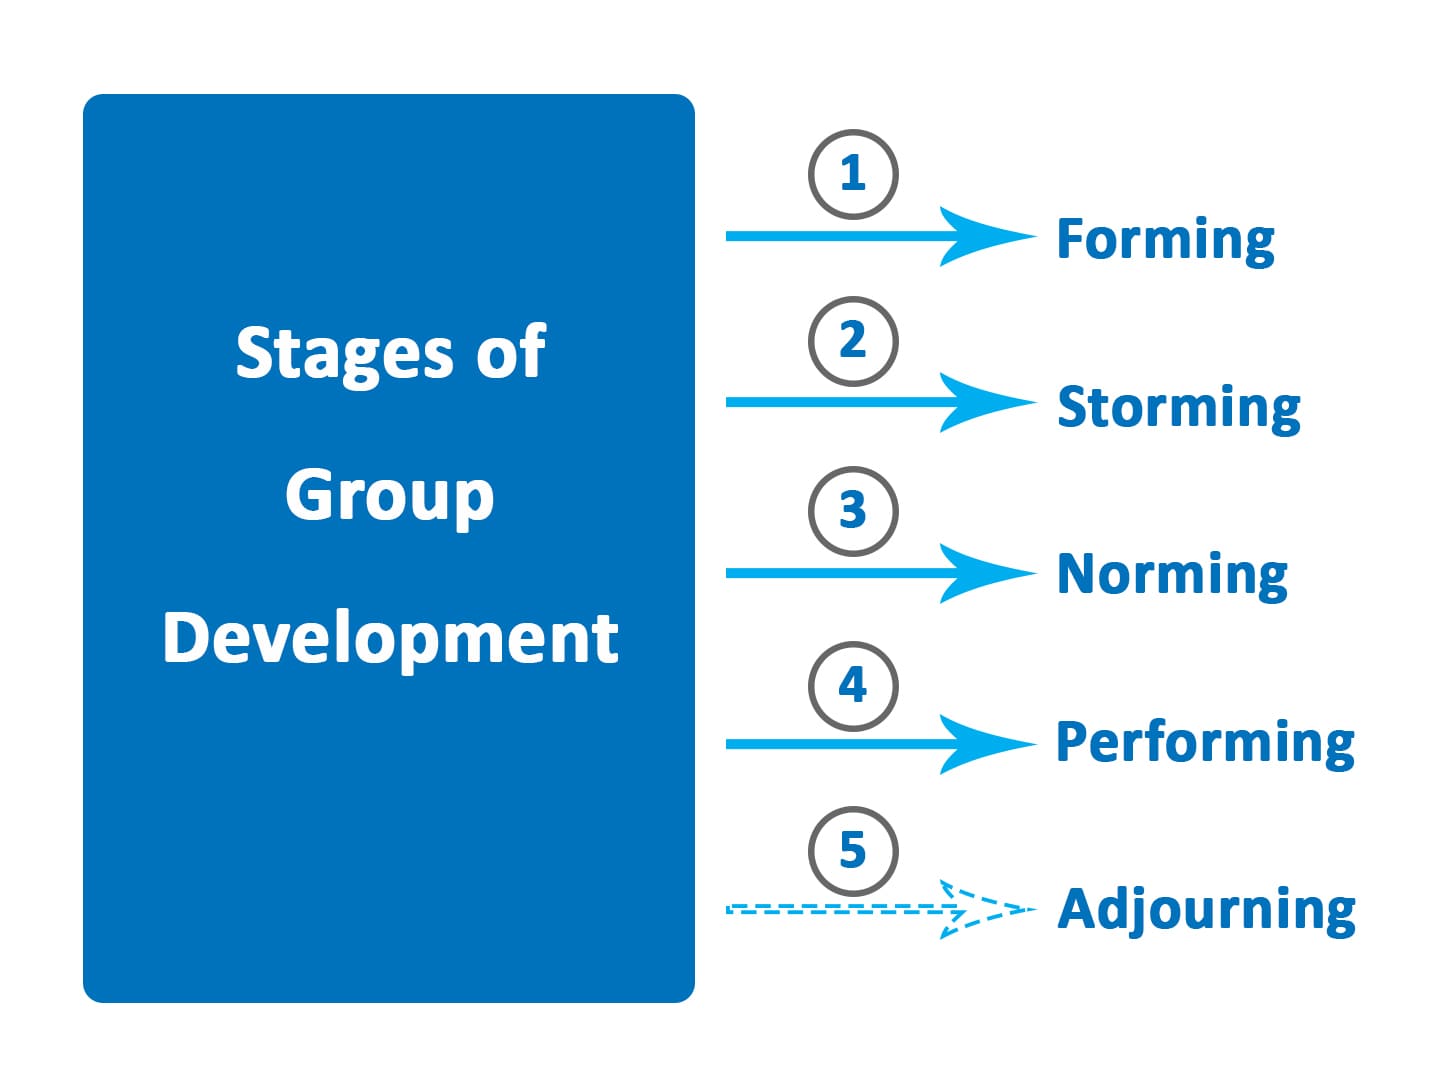 recent research shows that in the forming and storming stages